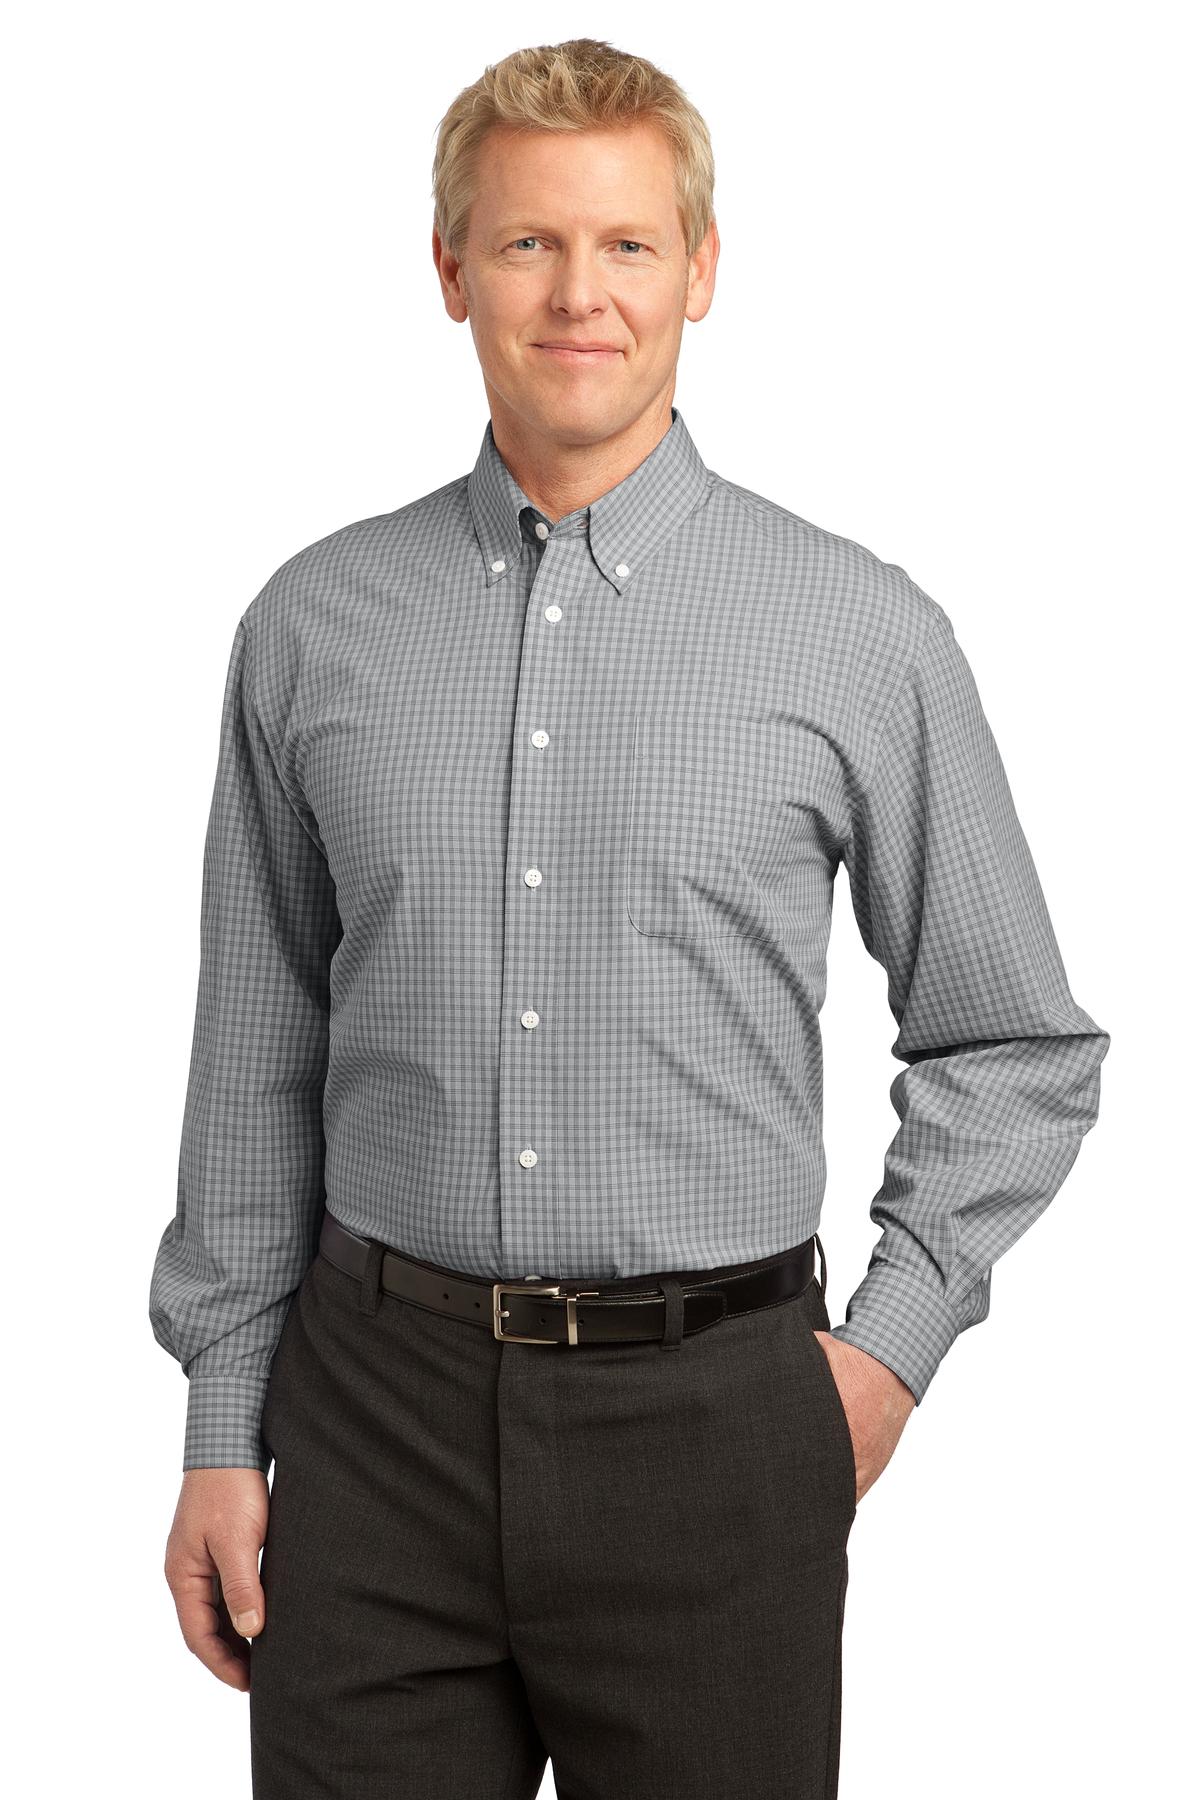 Port Authority Woven Shirts for Hospitality ® Plaid Pattern Easy Care Shirt.-Port Authority